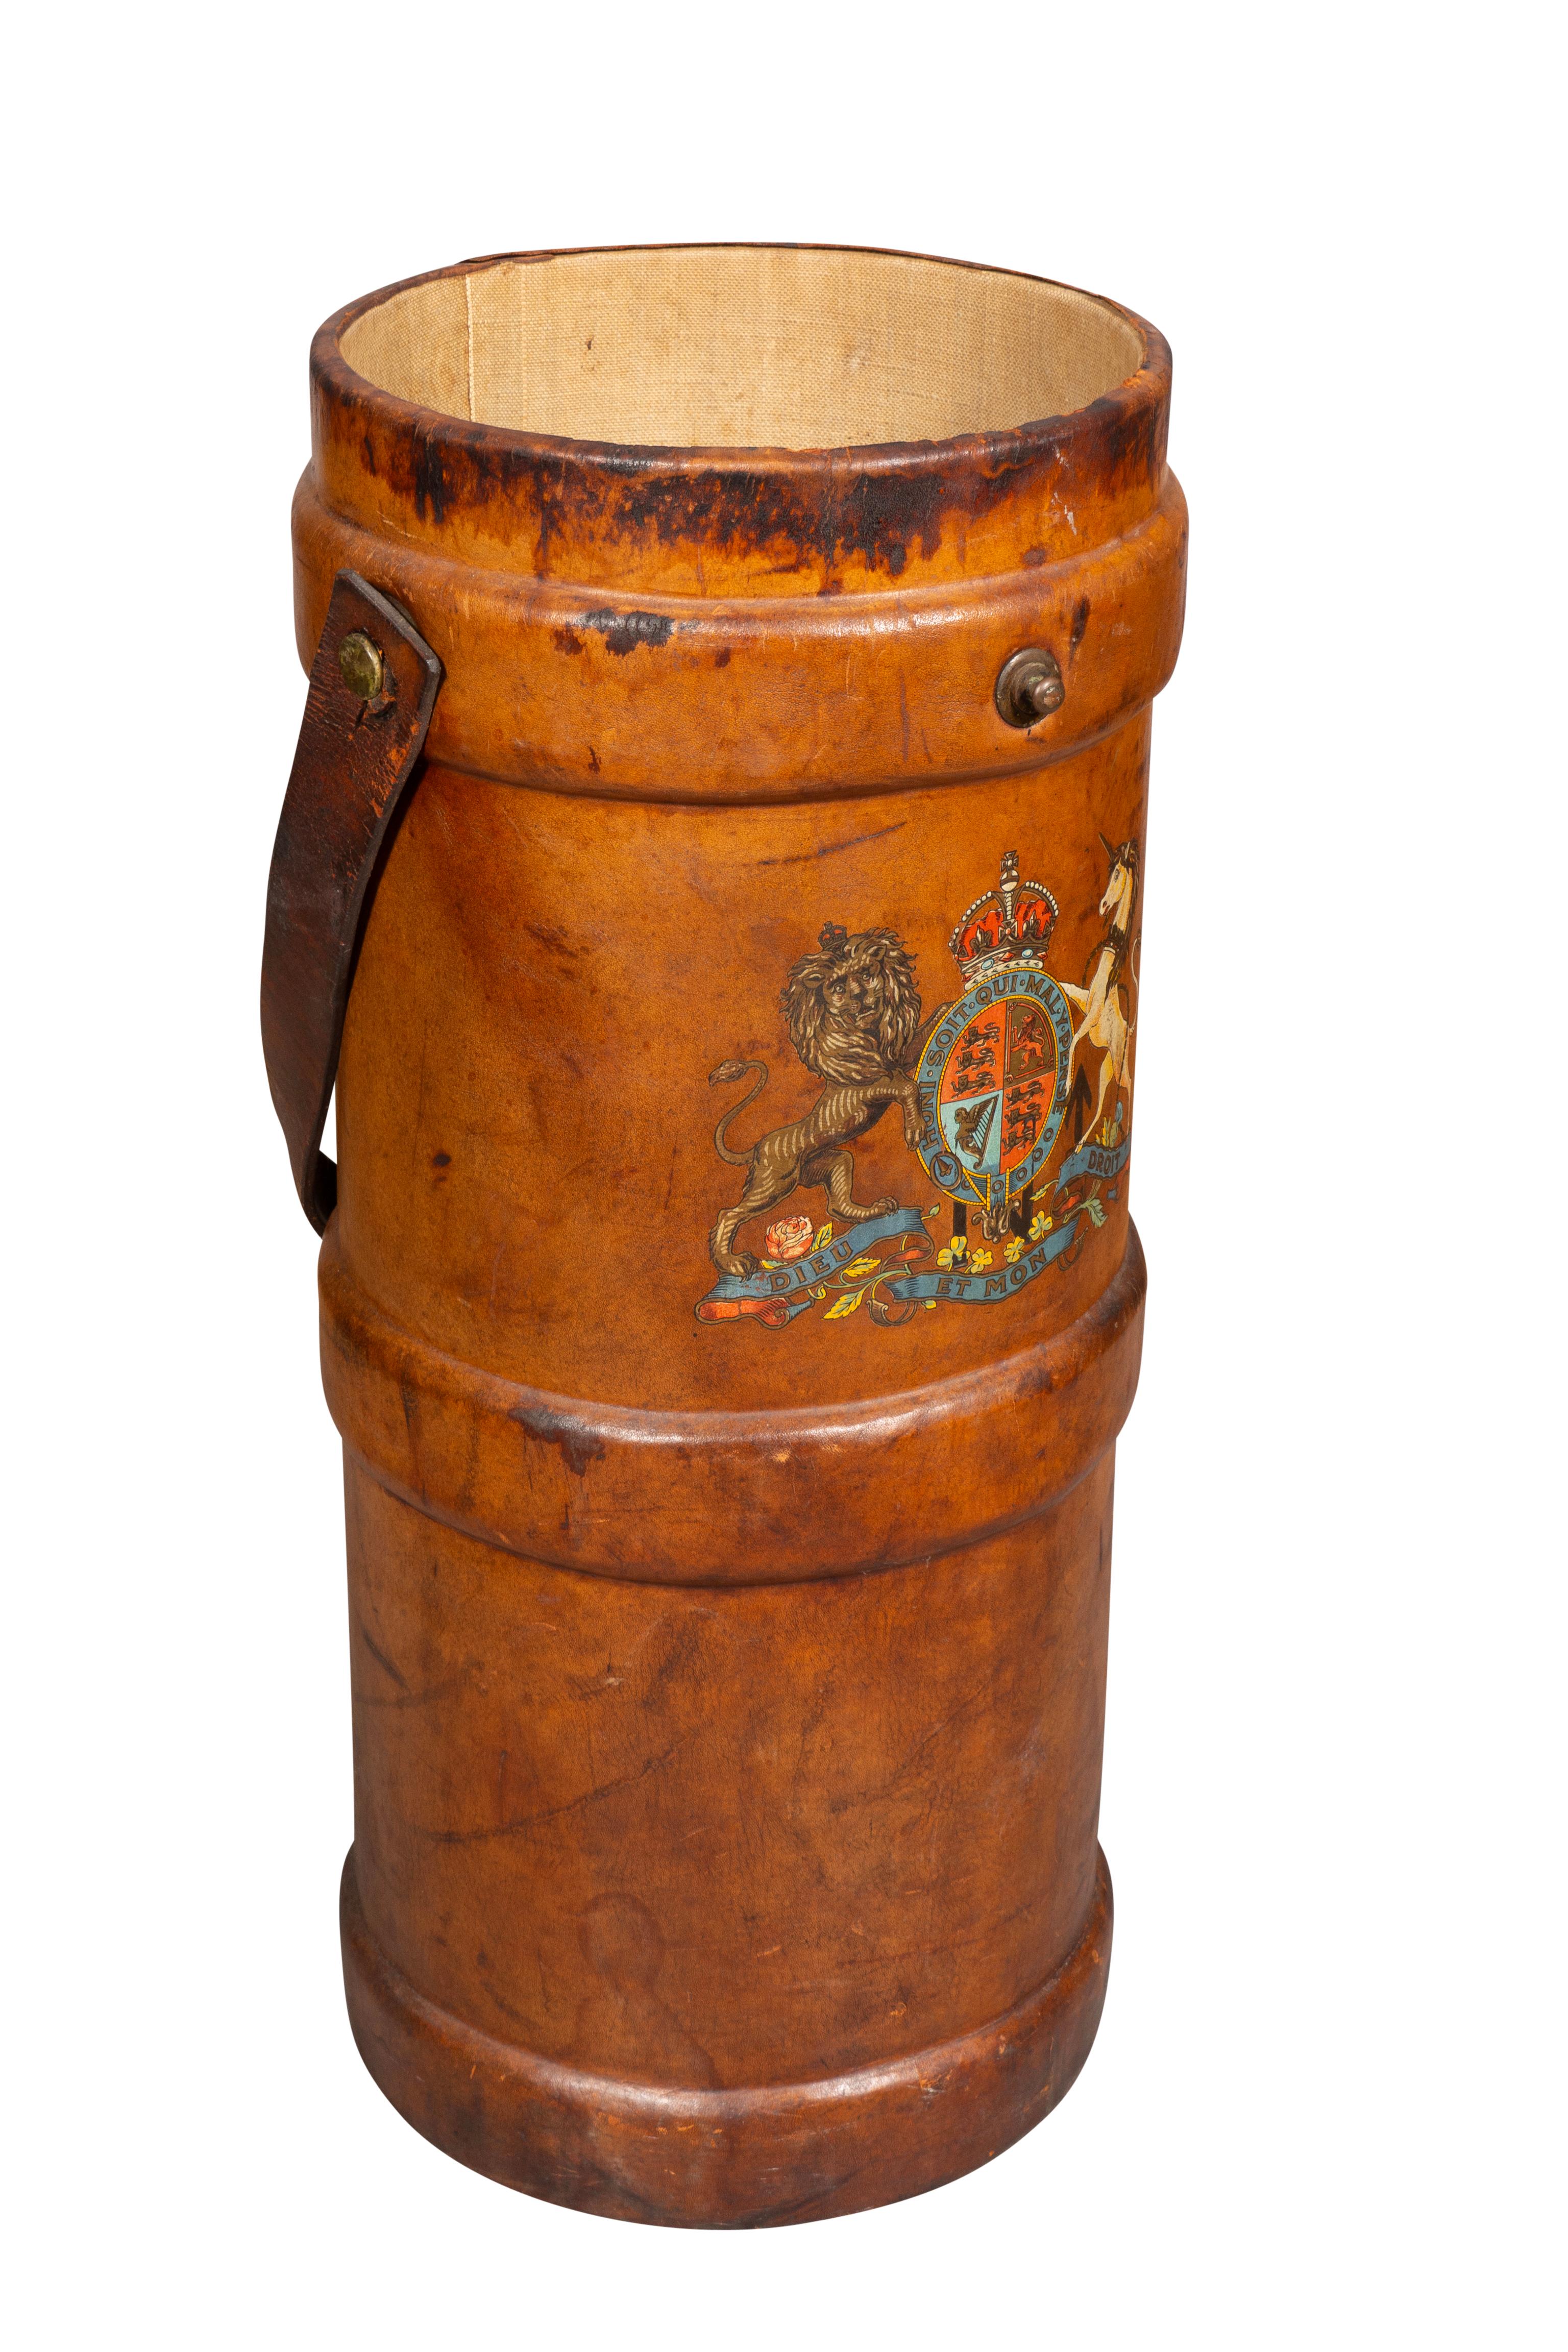 Cylindrical with handle and crest.